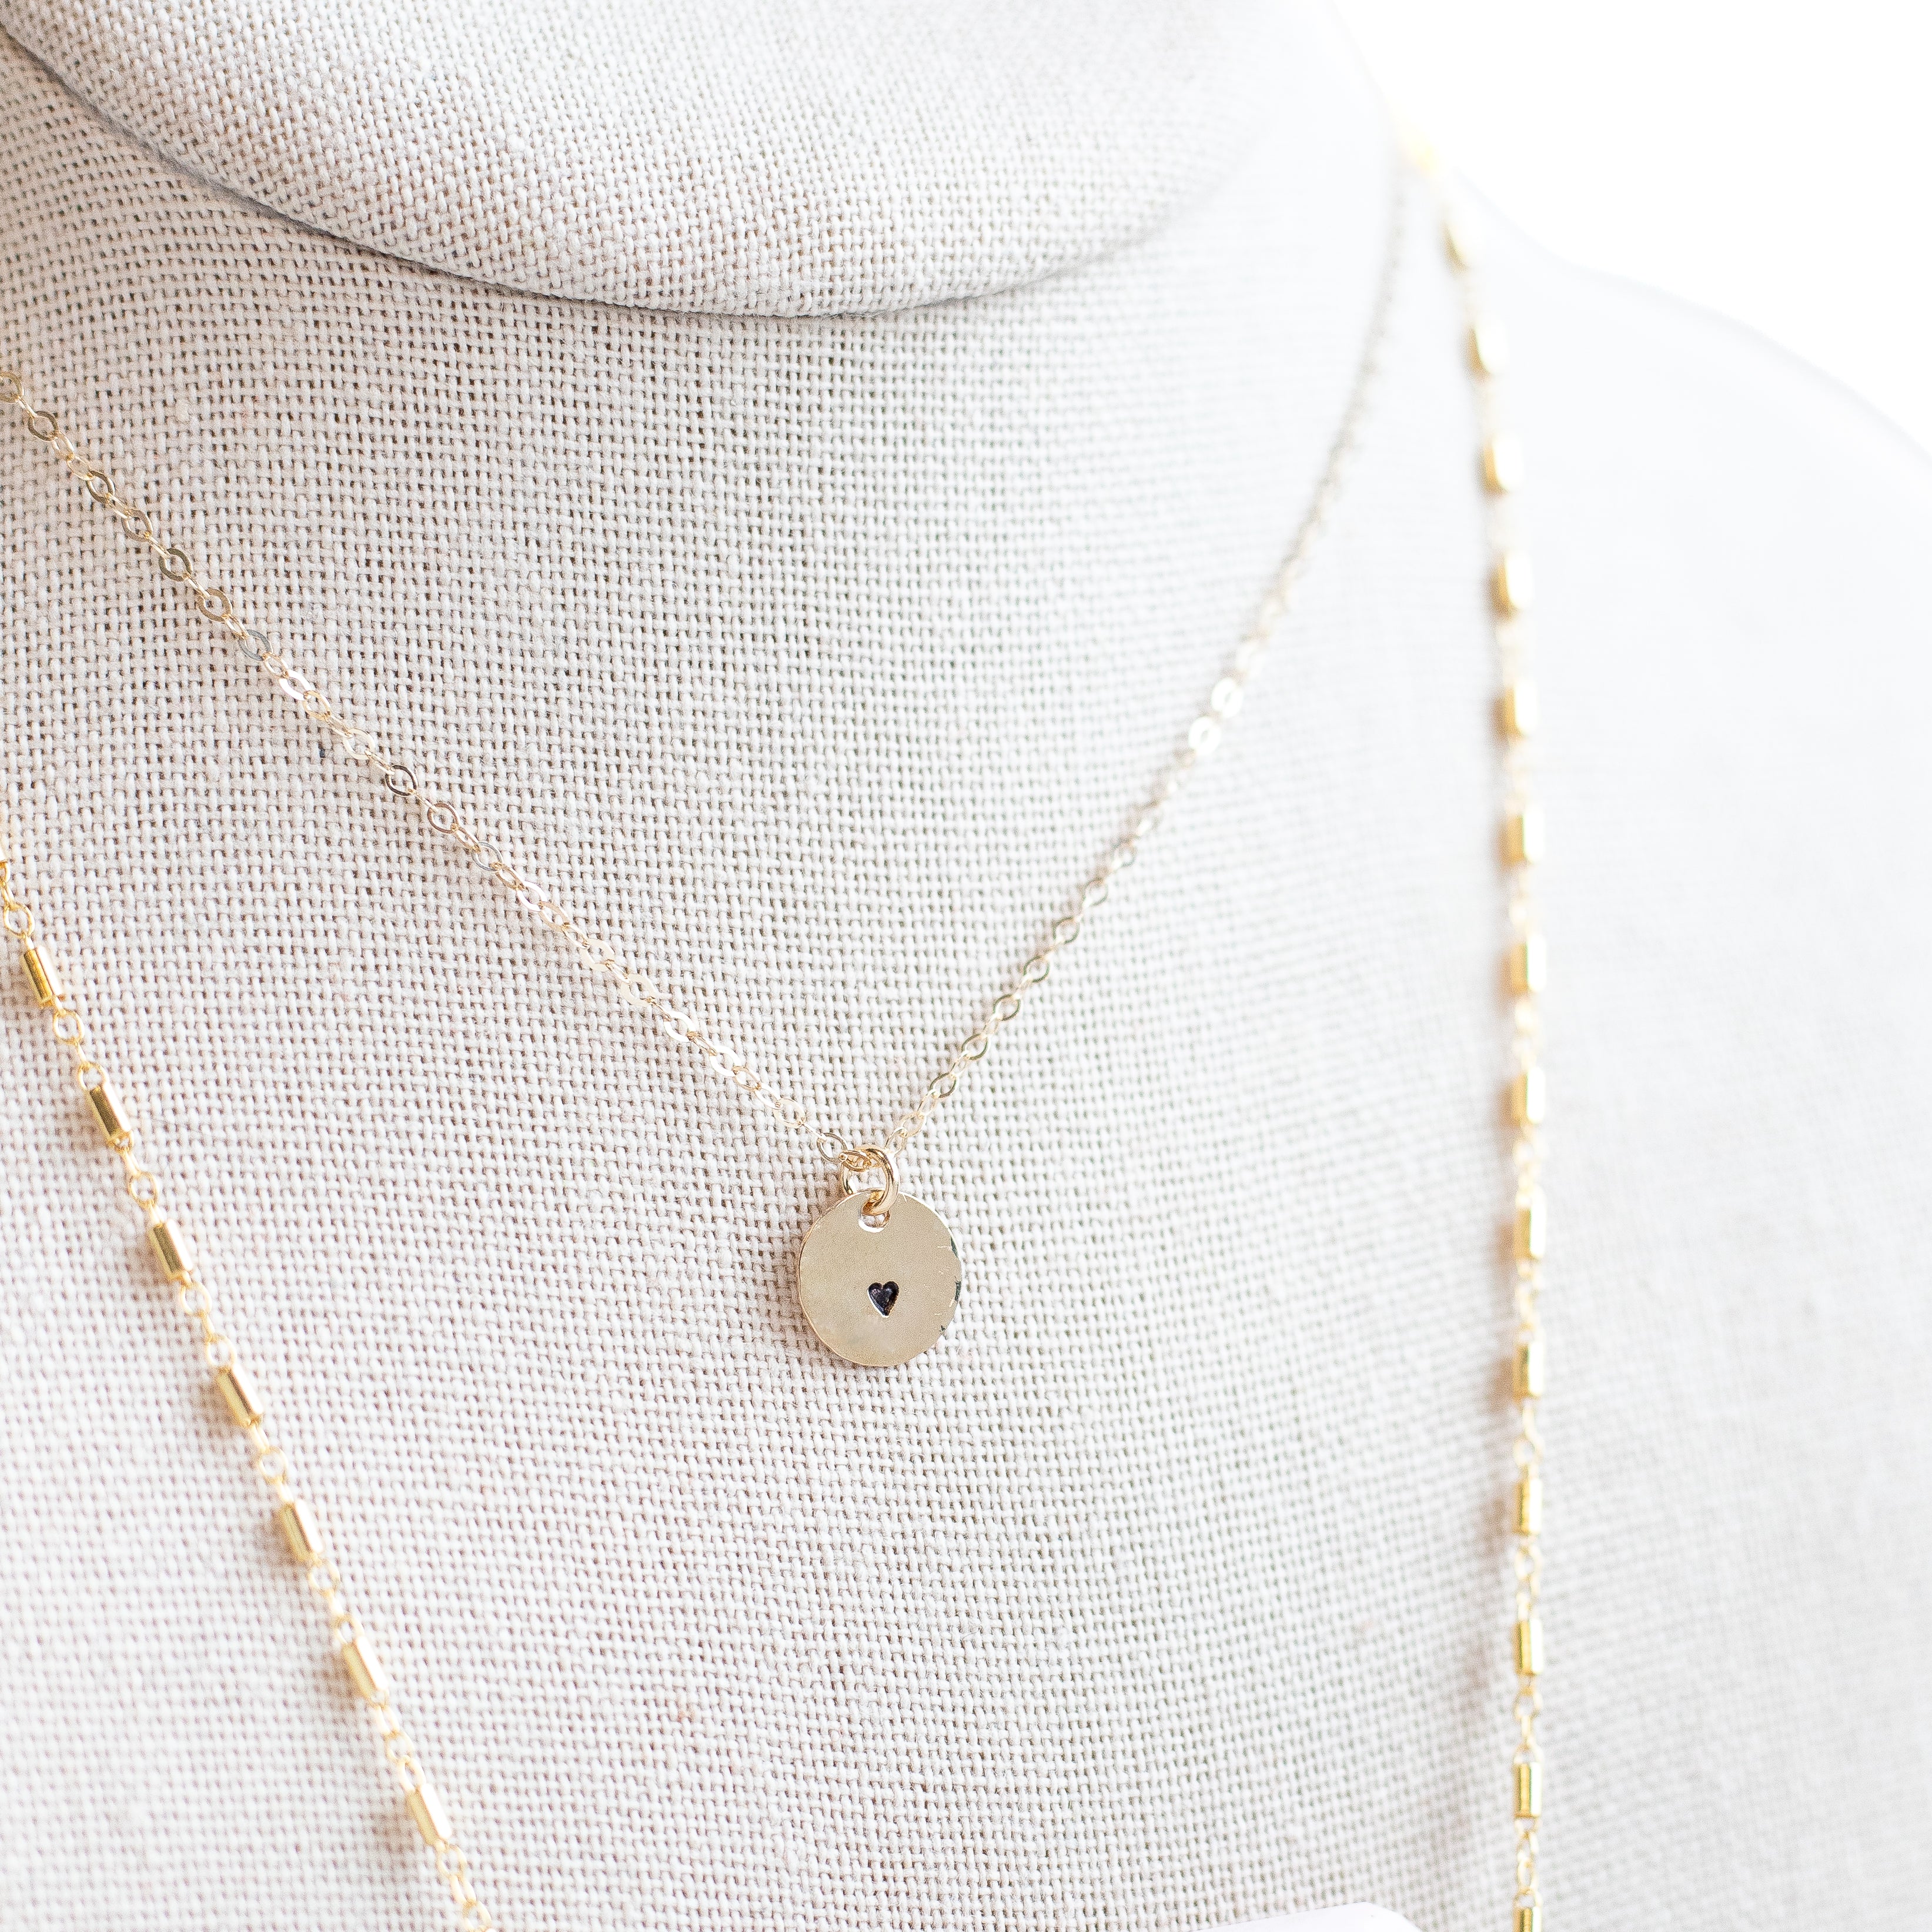 Teeny tiny circle with a heart stamped on it. on a gold filled chain. 